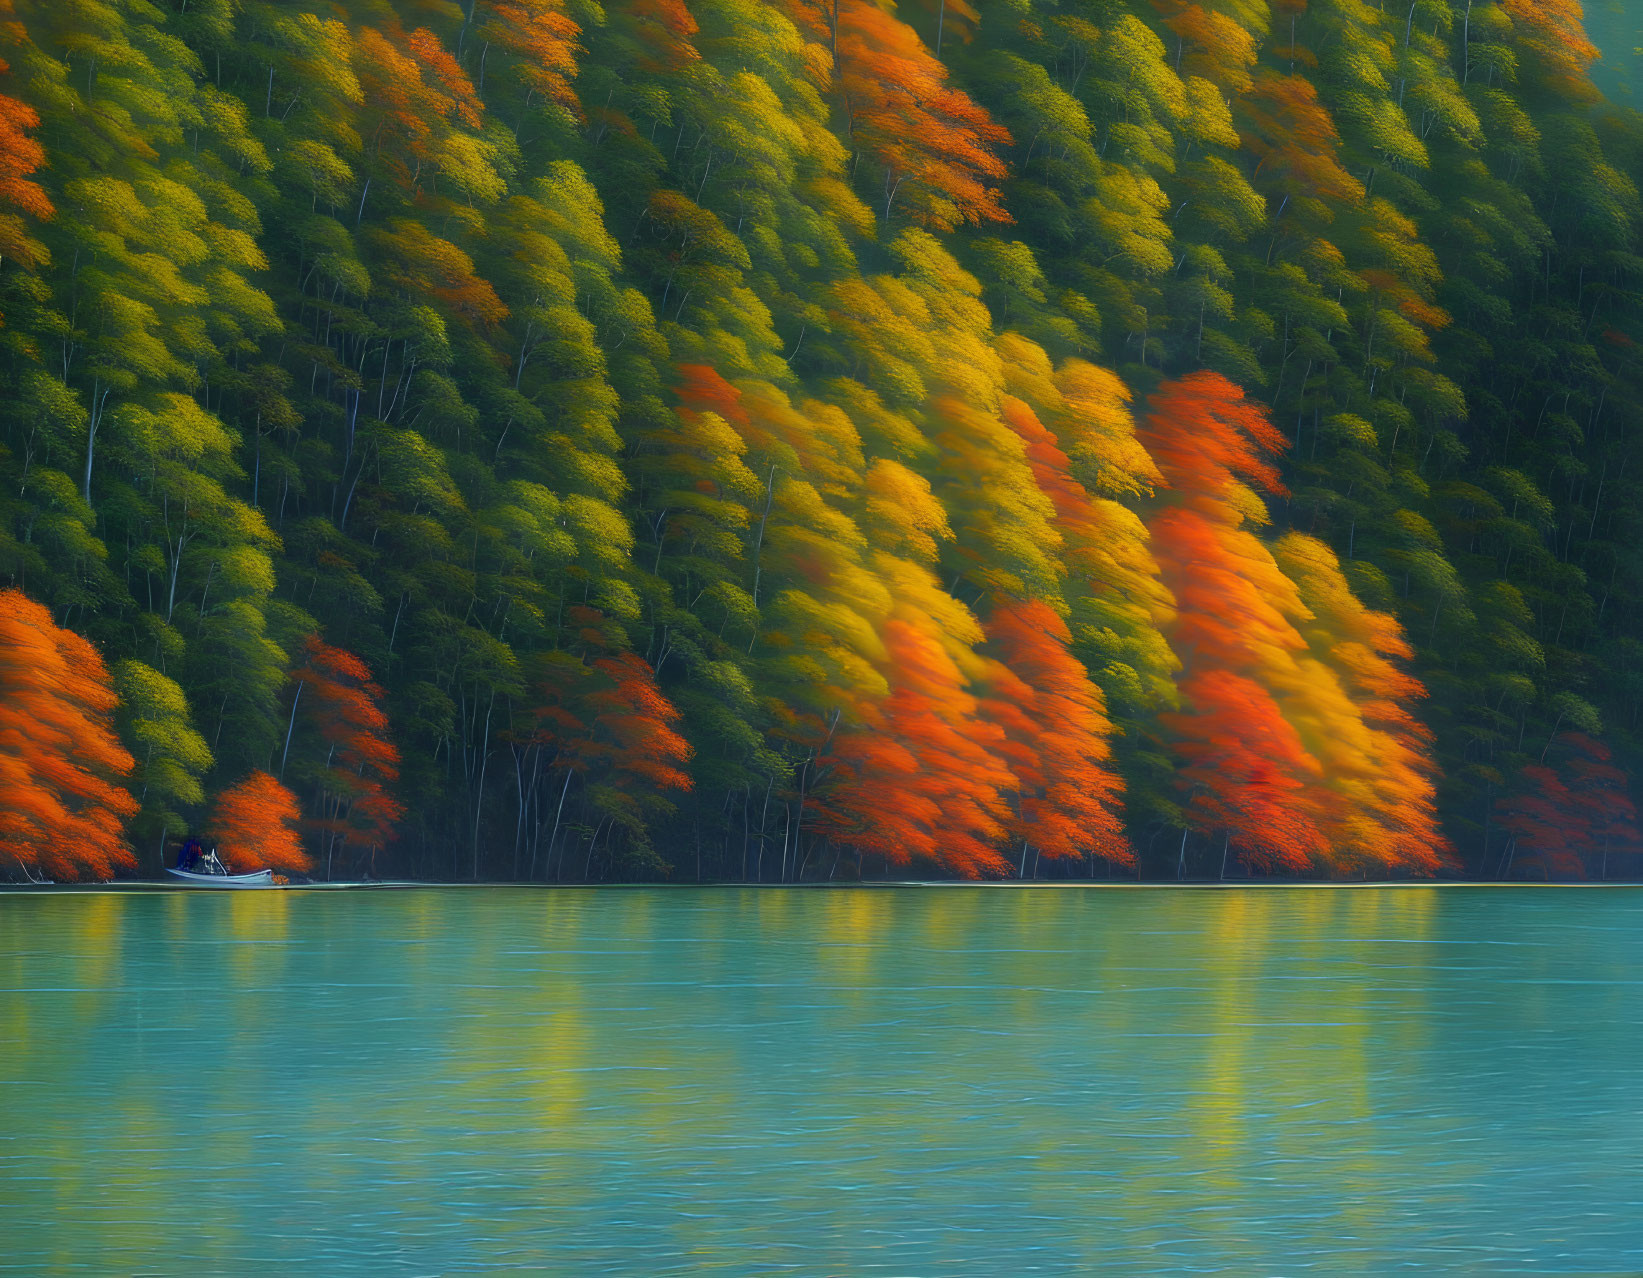 Colorful autumn trees mirroring in serene blue water with a small boat.